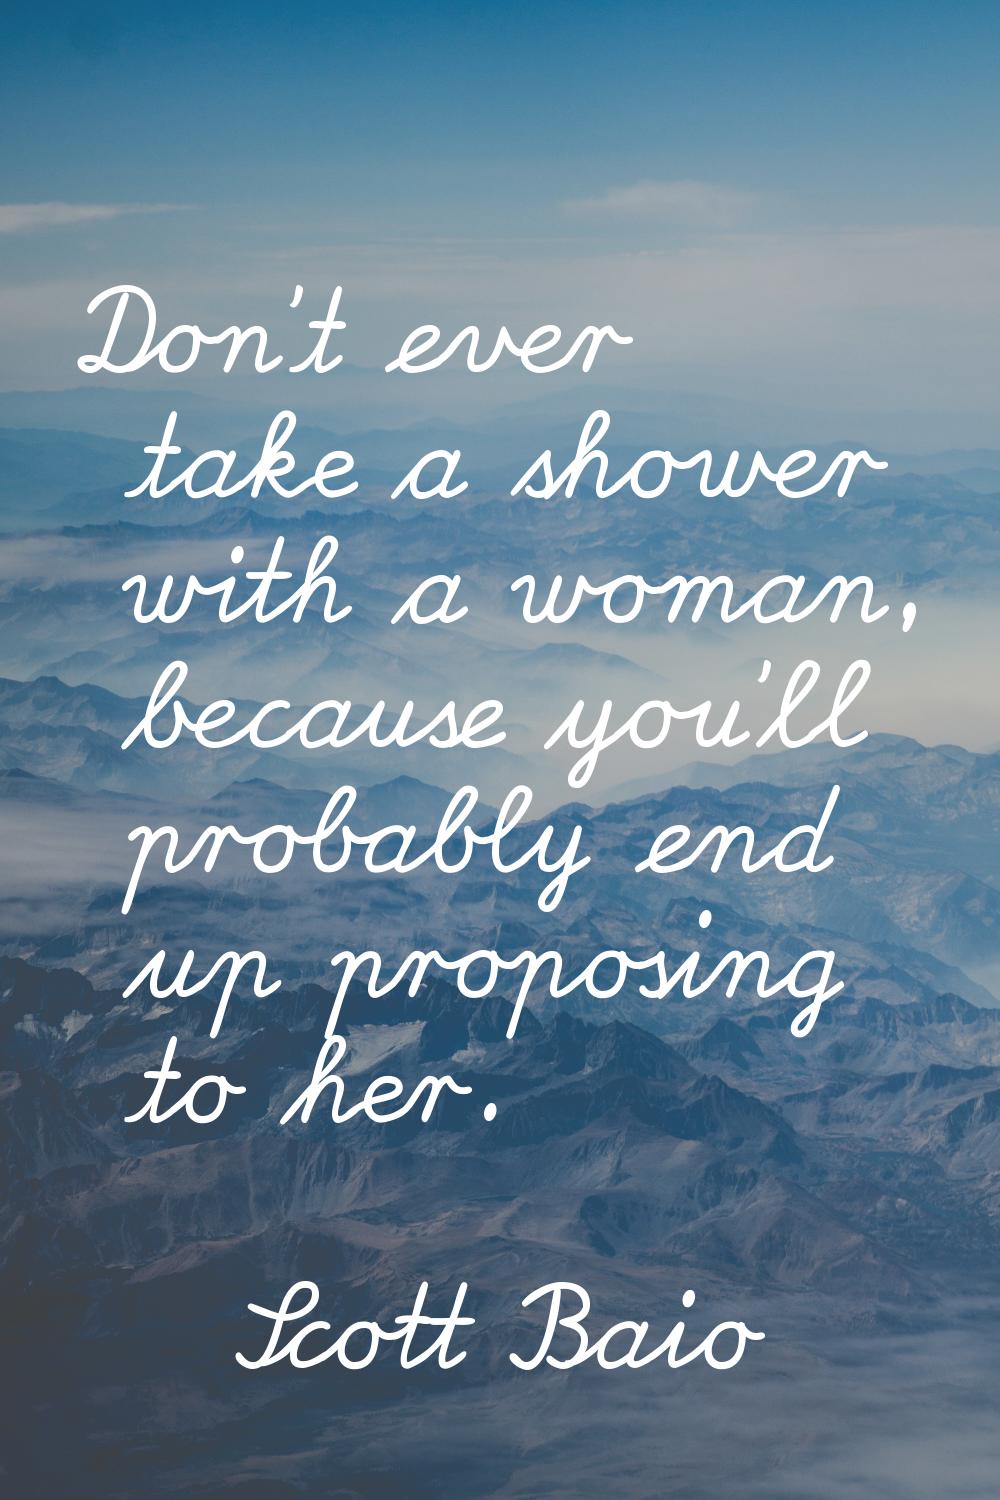 Don't ever take a shower with a woman, because you'll probably end up proposing to her.